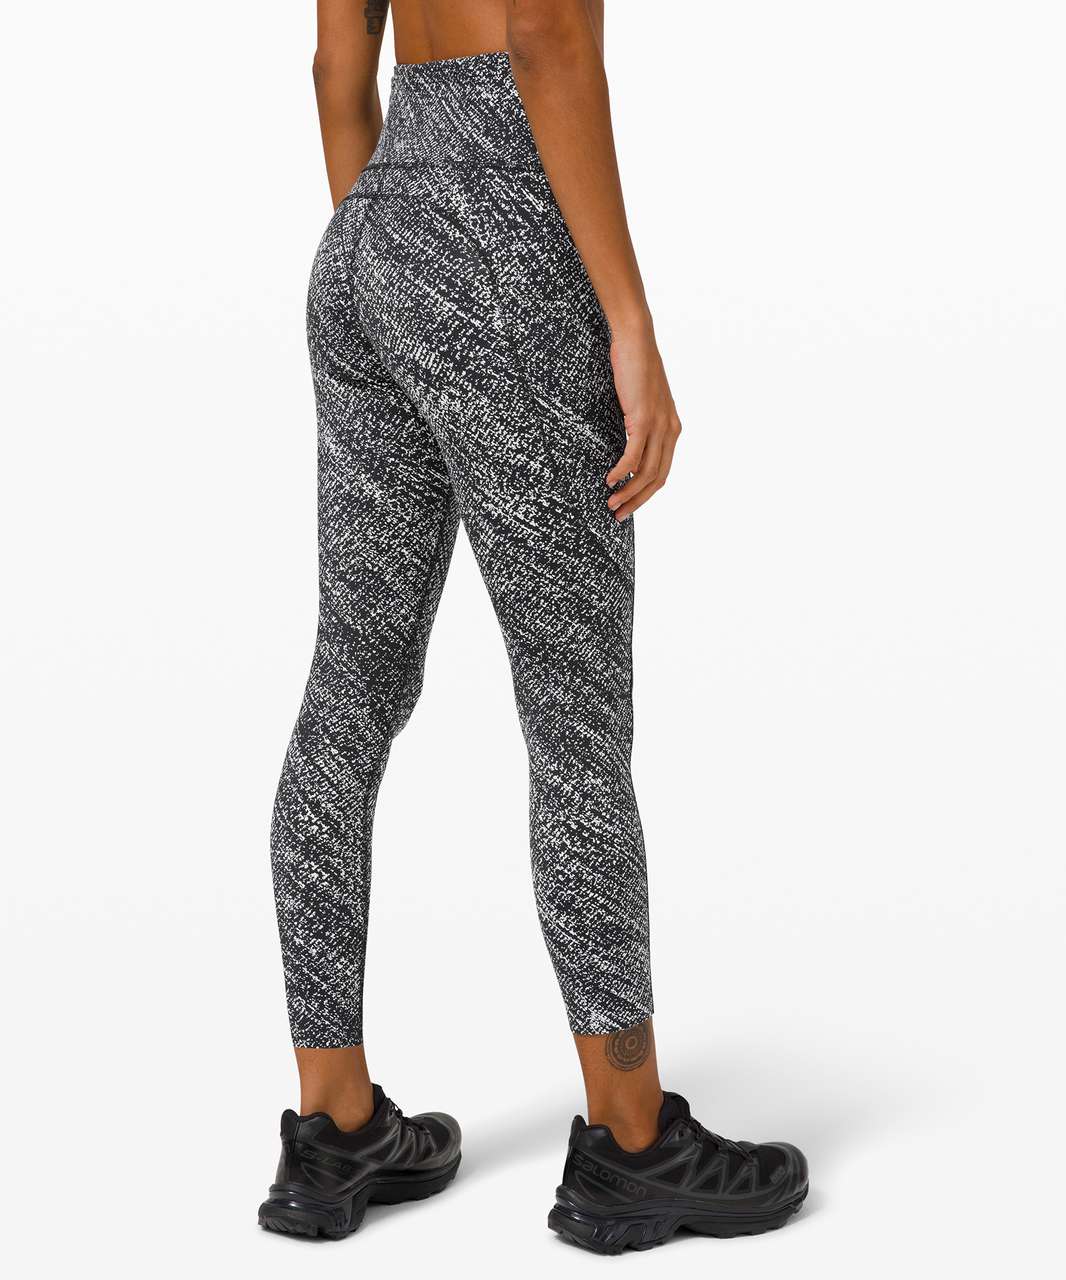 Lululemon Fast and Free Tight II 25 *Non-Reflective Nulux - Activate  Floral Multi - lulu fanatics